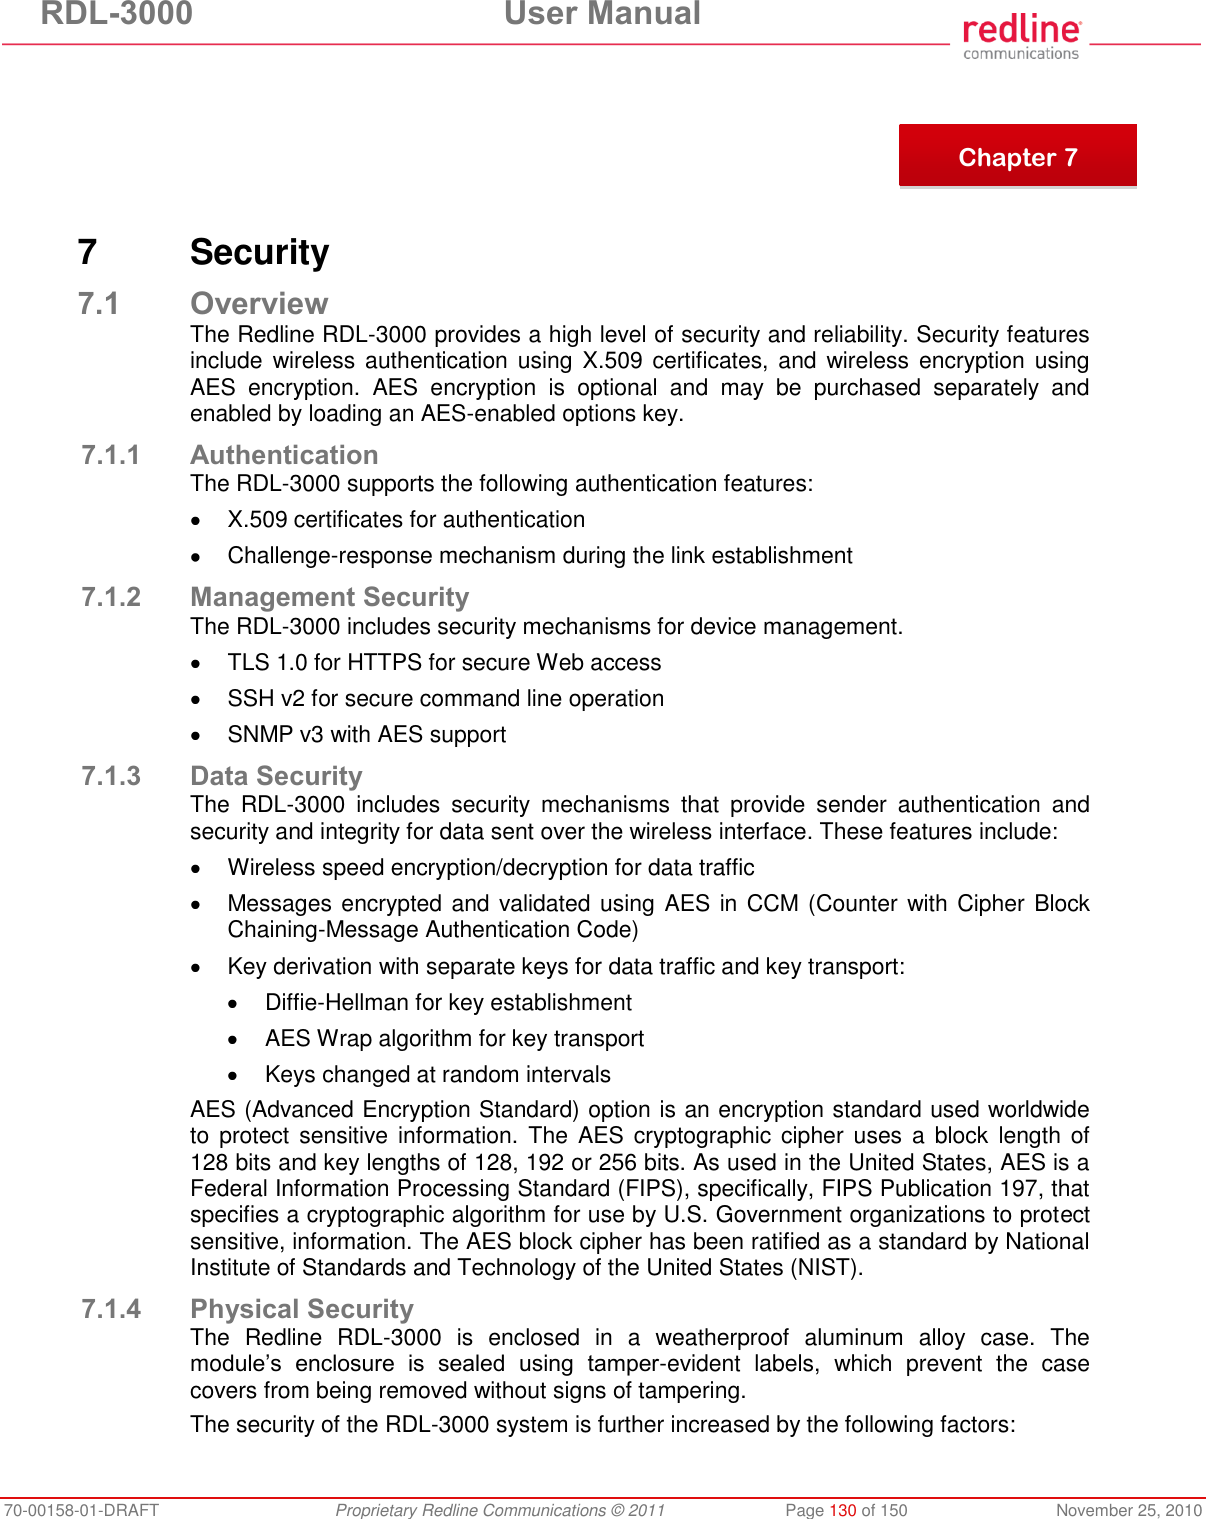 RDL-3000  User Manual 70-00158-01-DRAFT  Proprietary Redline Communications © 2011  Page 130 of 150  November 25, 2010        7  Security 7.1 Overview The Redline RDL-3000 provides a high level of security and reliability. Security features include wireless authentication  using  X.509 certificates,  and  wireless encryption using AES  encryption.  AES  encryption  is  optional  and  may  be  purchased  separately  and enabled by loading an AES-enabled options key. 7.1.1 Authentication The RDL-3000 supports the following authentication features:   X.509 certificates for authentication   Challenge-response mechanism during the link establishment 7.1.2 Management Security The RDL-3000 includes security mechanisms for device management.   TLS 1.0 for HTTPS for secure Web access  SSH v2 for secure command line operation   SNMP v3 with AES support 7.1.3 Data Security The  RDL-3000  includes  security  mechanisms  that  provide  sender  authentication  and security and integrity for data sent over the wireless interface. These features include:   Wireless speed encryption/decryption for data traffic   Messages encrypted and validated using AES in CCM (Counter with Cipher Block Chaining-Message Authentication Code)   Key derivation with separate keys for data traffic and key transport:   Diffie-Hellman for key establishment   AES Wrap algorithm for key transport   Keys changed at random intervals AES (Advanced Encryption Standard) option is an encryption standard used worldwide to  protect  sensitive information.  The AES cryptographic cipher  uses  a  block length of 128 bits and key lengths of 128, 192 or 256 bits. As used in the United States, AES is a Federal Information Processing Standard (FIPS), specifically, FIPS Publication 197, that specifies a cryptographic algorithm for use by U.S. Government organizations to protect sensitive, information. The AES block cipher has been ratified as a standard by National Institute of Standards and Technology of the United States (NIST). 7.1.4 Physical Security The  Redline  RDL-3000  is  enclosed  in  a  weatherproof  aluminum  alloy  case.  The module’s  enclosure  is  sealed  using  tamper-evident  labels,  which  prevent  the  case covers from being removed without signs of tampering.   The security of the RDL-3000 system is further increased by the following factors:  Chapter 7 